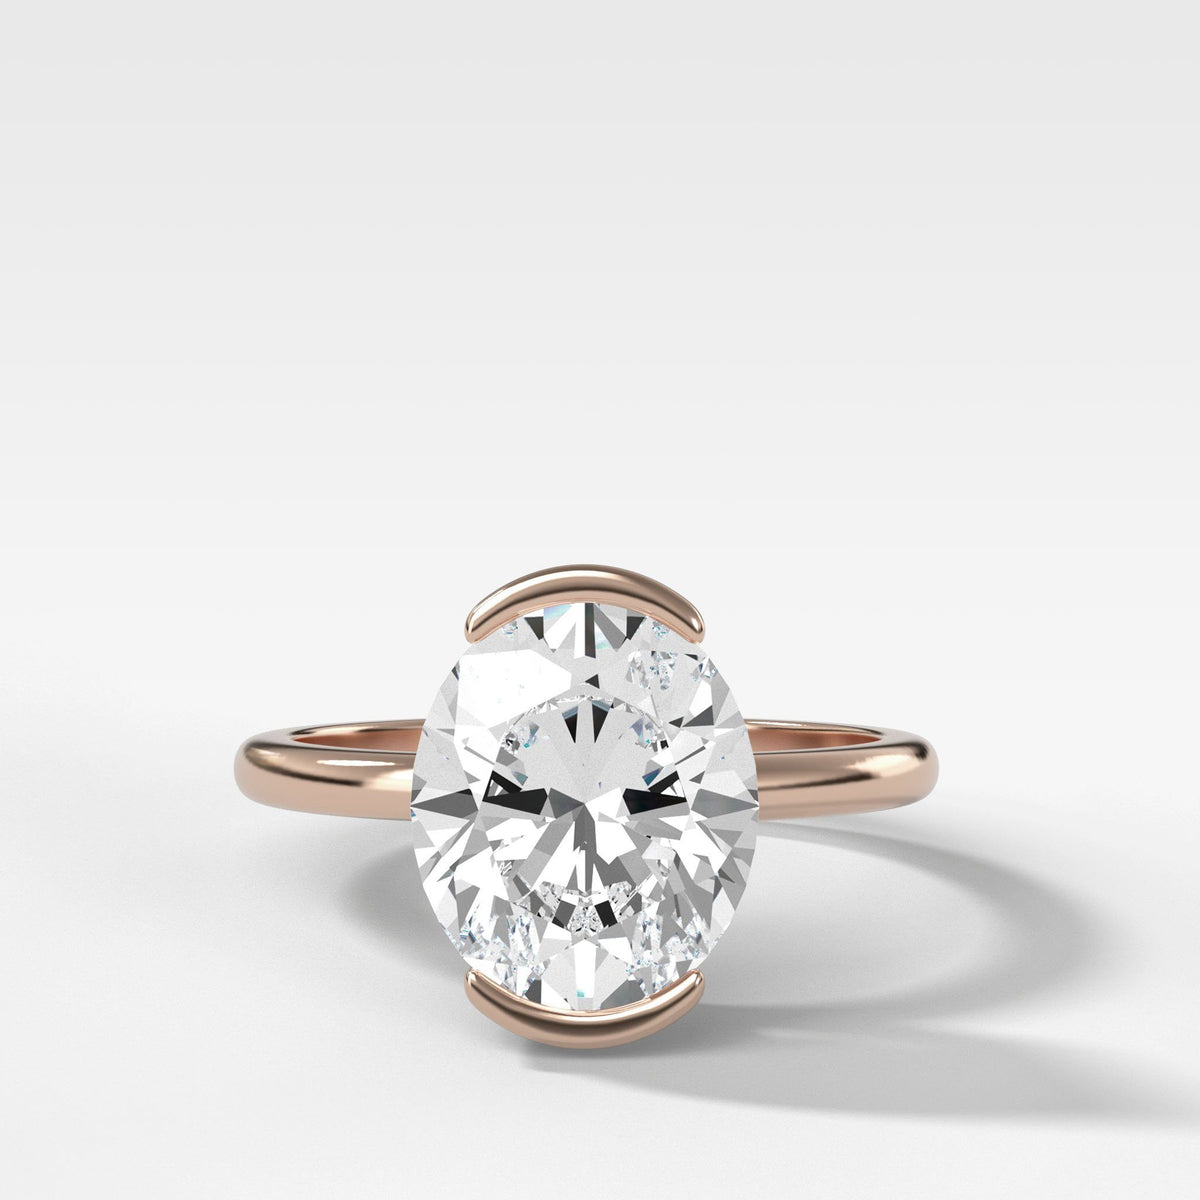 North South Half Bezel Solitaire Engagement Ring With Oval Cut by Good Stone in Rose Gold